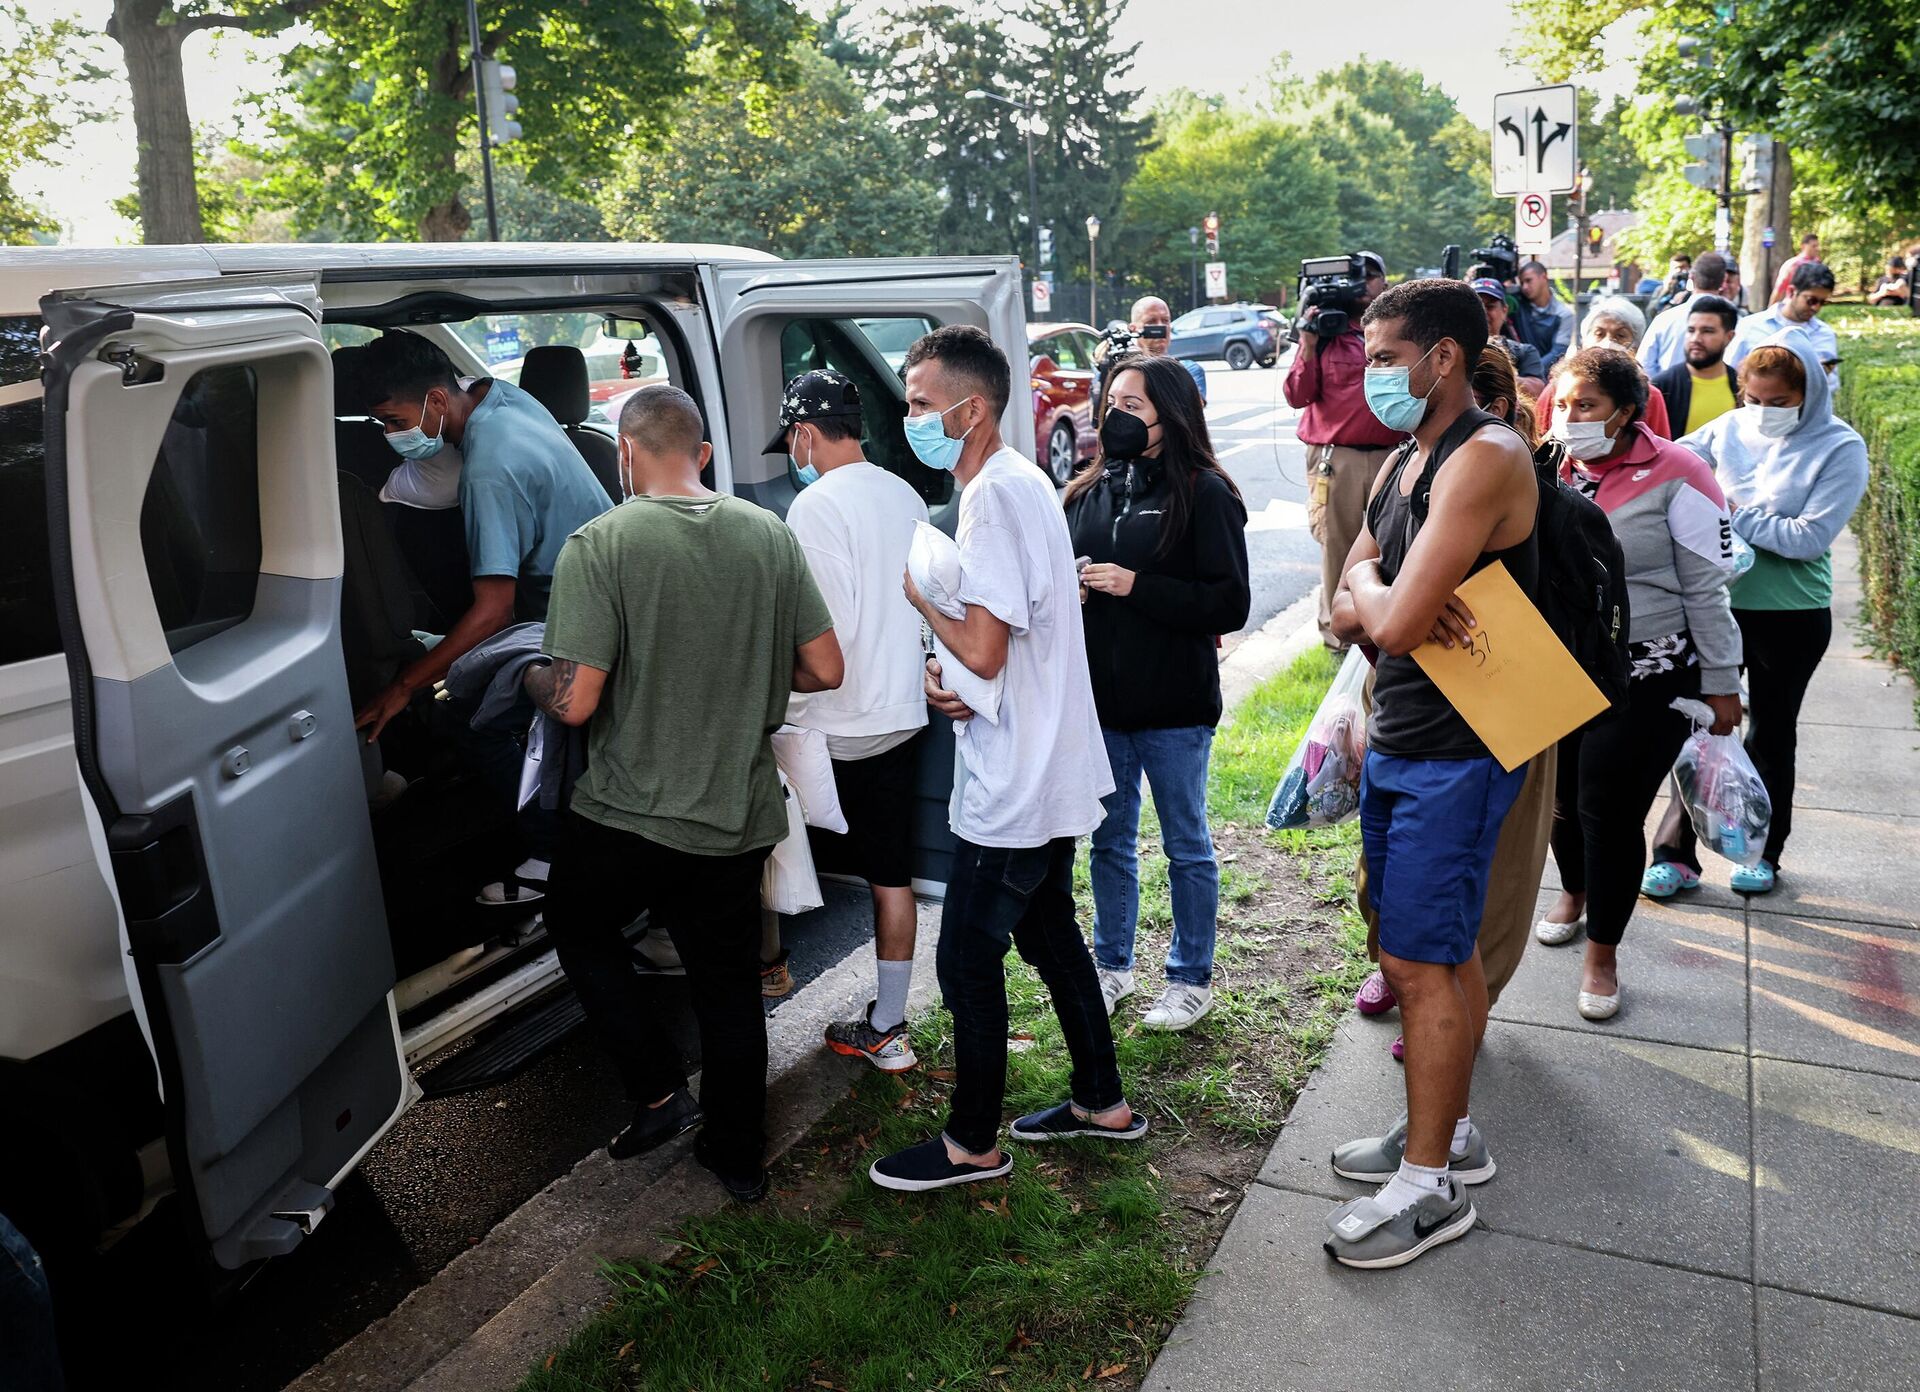 WASHINGTON, DC - SEPTEMBER 15: Migrants from Central and South America load into vans near the residence of US Vice President Kamala Harris after being dropped off on September 15, 2022 in Washington, DC.  - Sputnik International, 1920, 16.09.2022